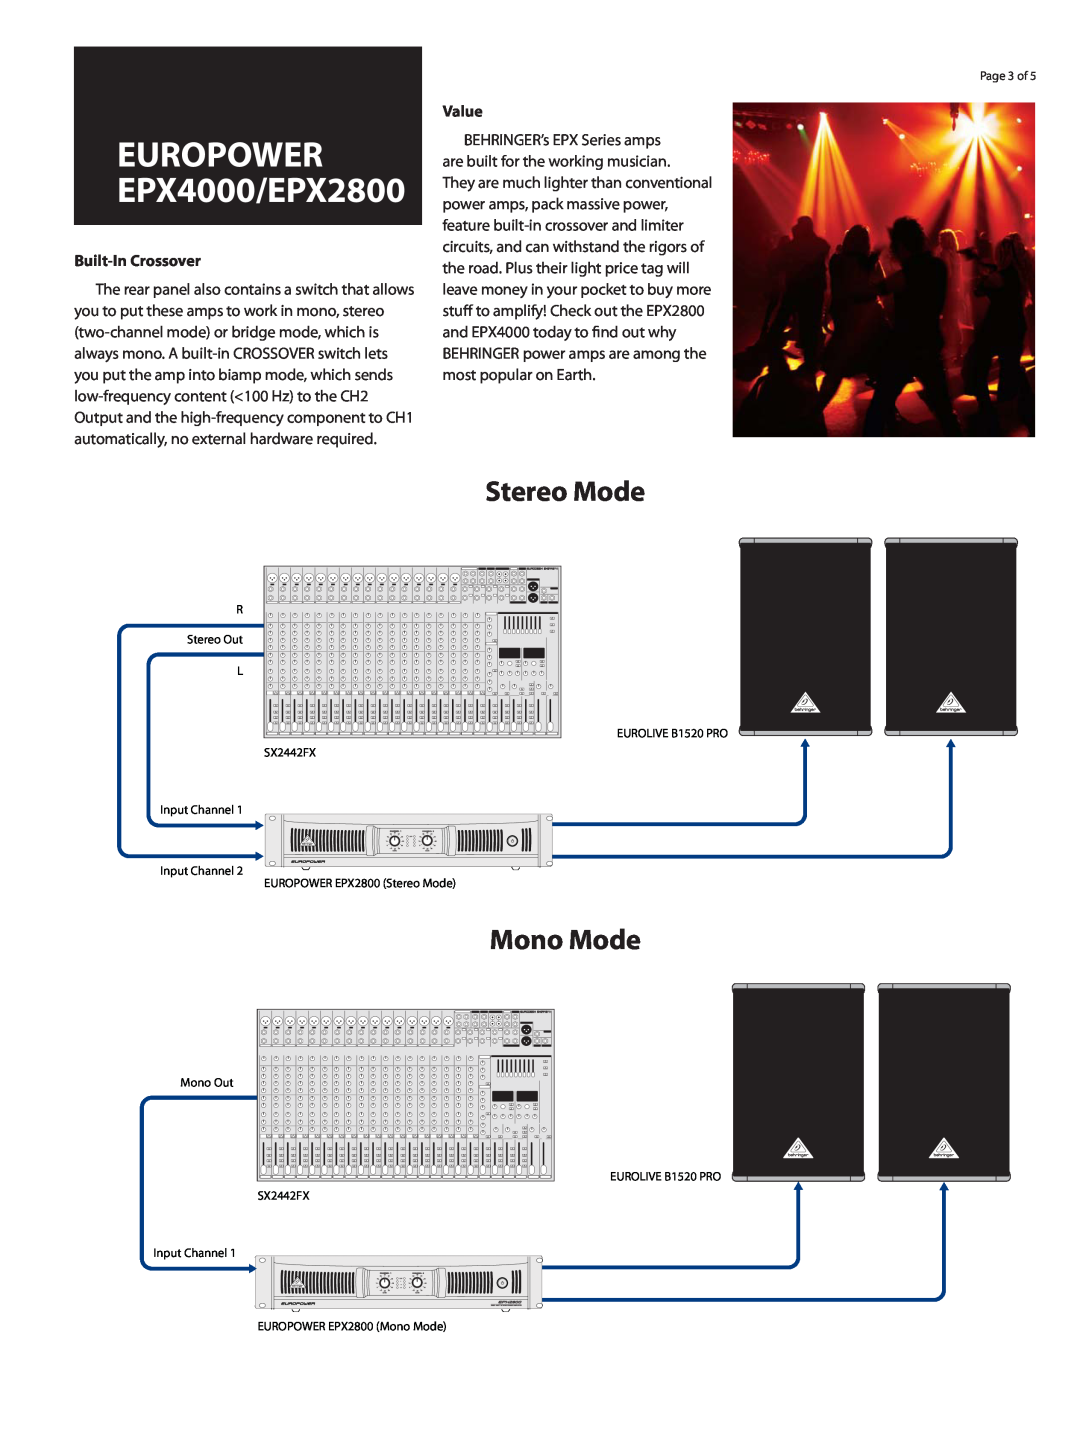 Behringer manual Stereo Mode, Mono Mode, EUROPOWER EPX4000/EPX2800, Built-InCrossover, Value 